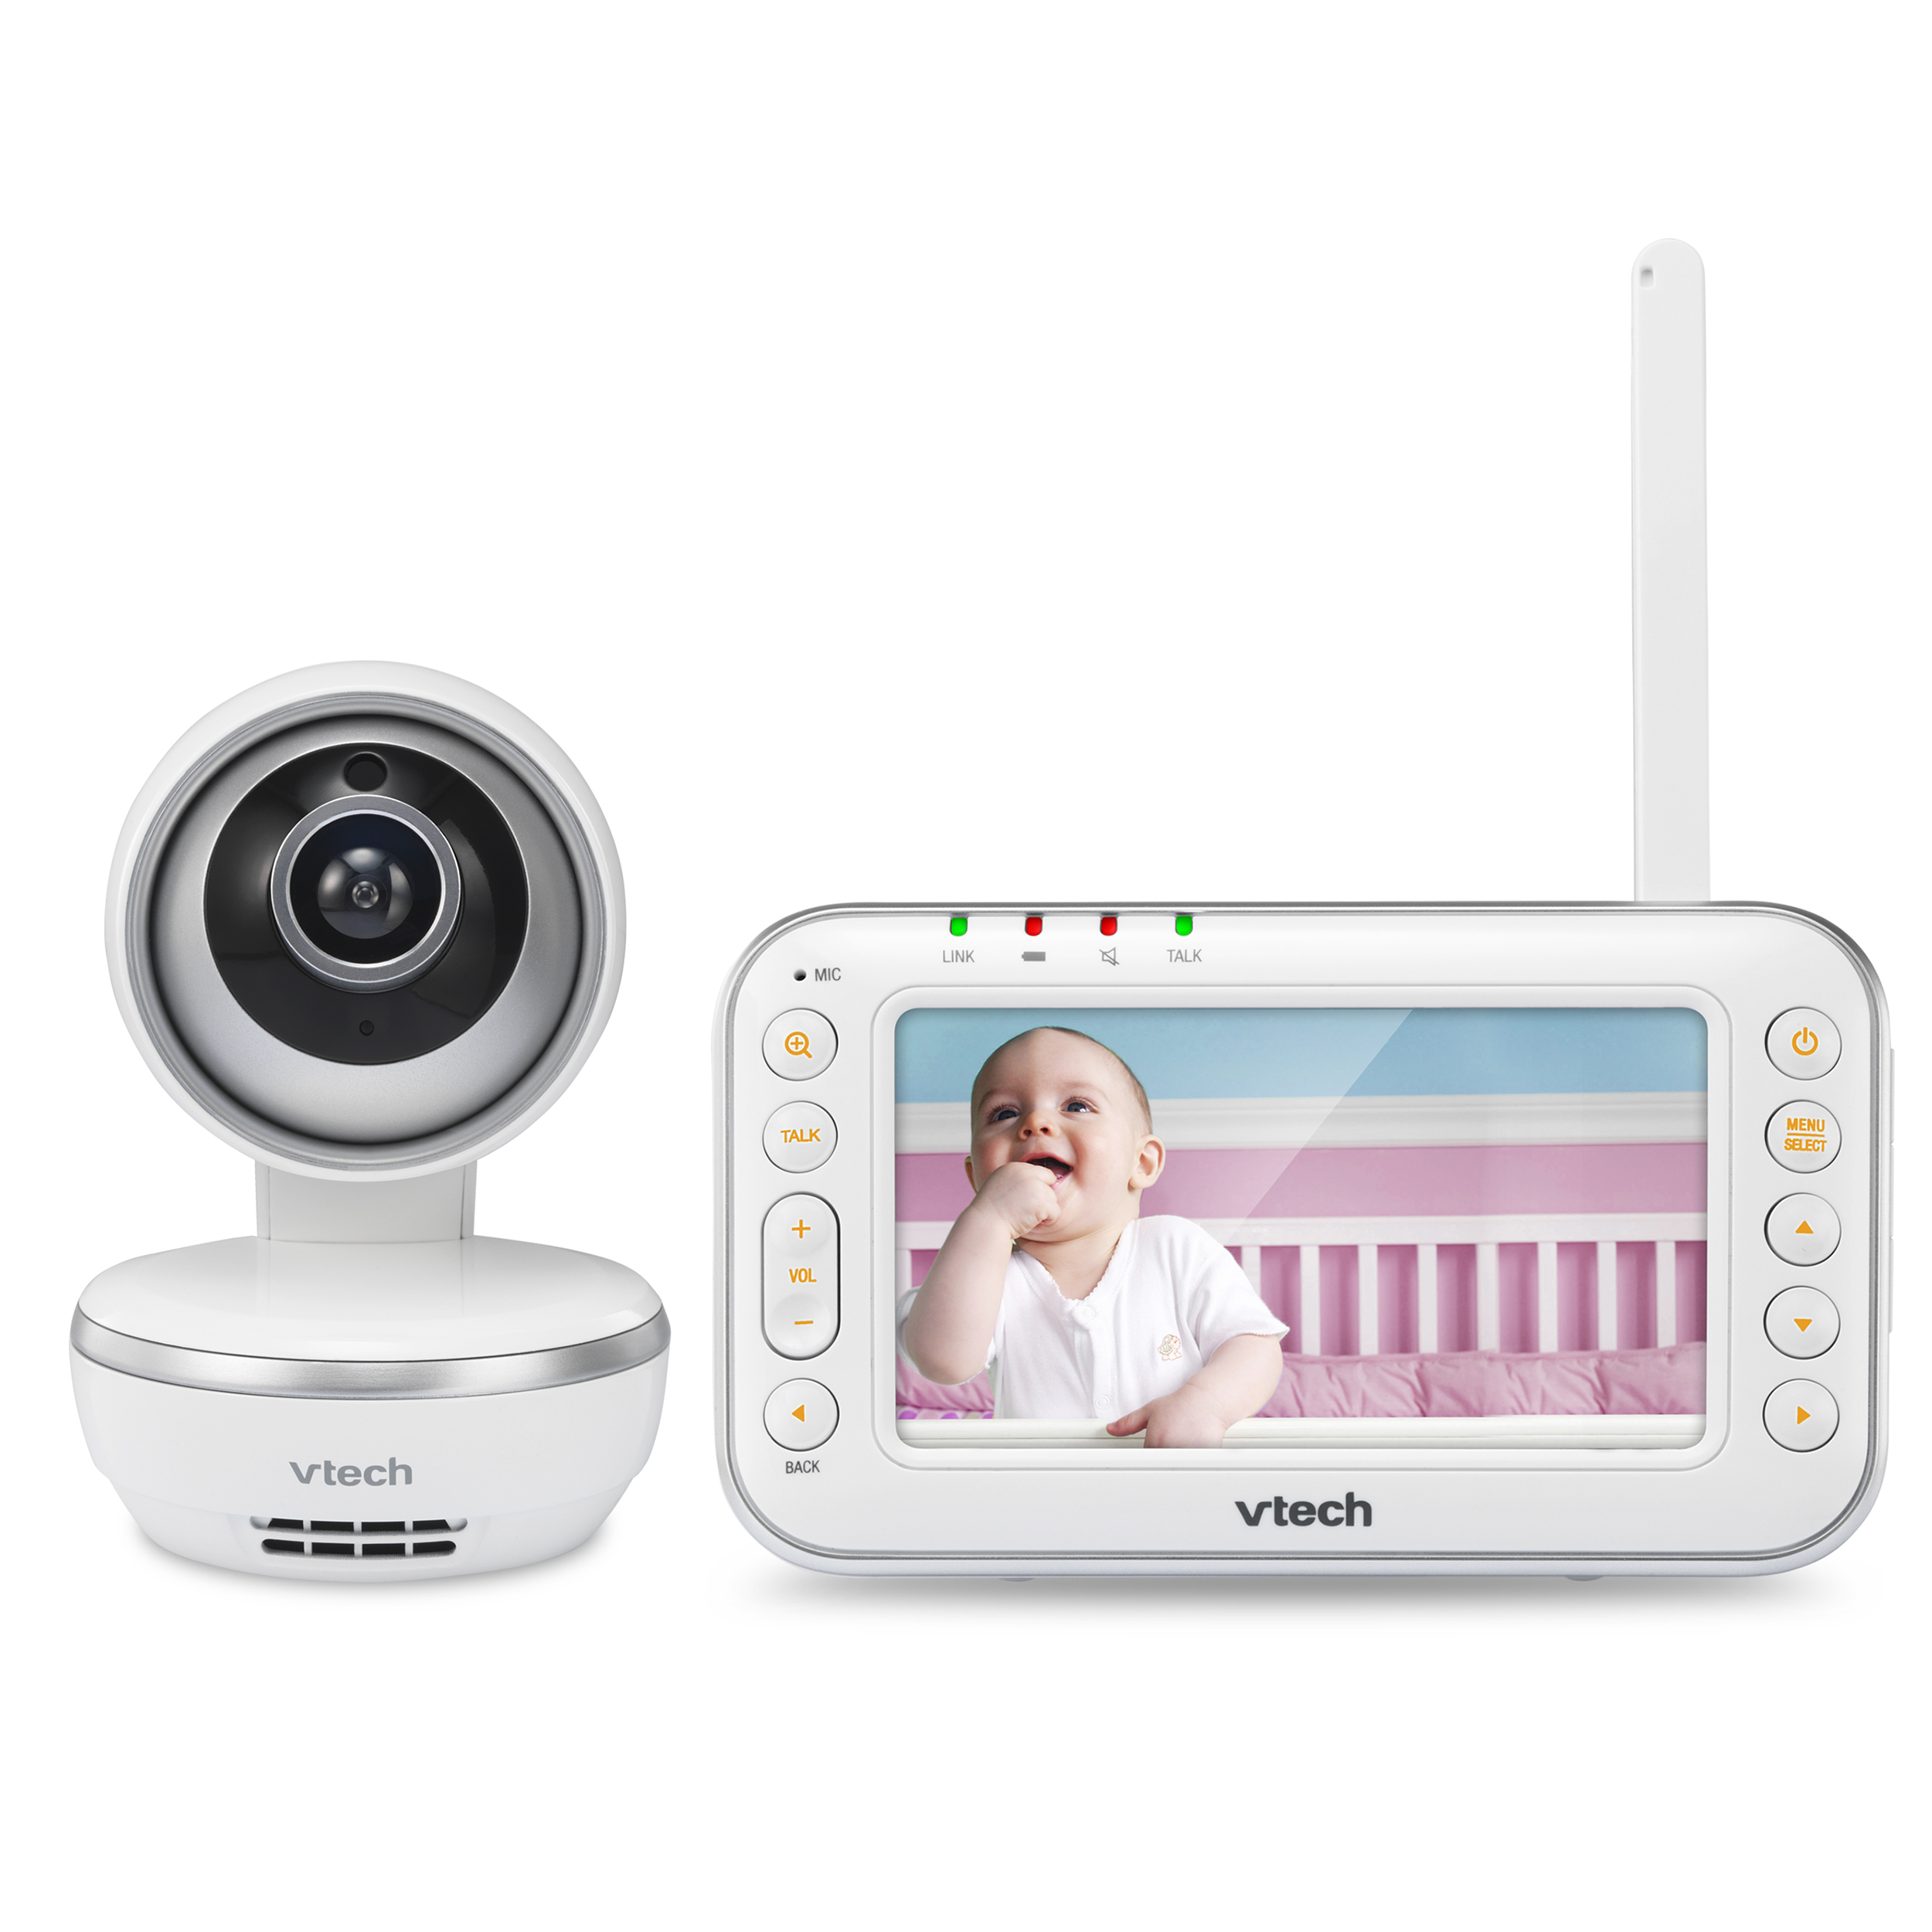 VTech VM4261, 4.3" Digital Video Baby Monitor with Pan & Tilt Camera, Wide-Angle Lens and Standard Lens, White - image 1 of 13